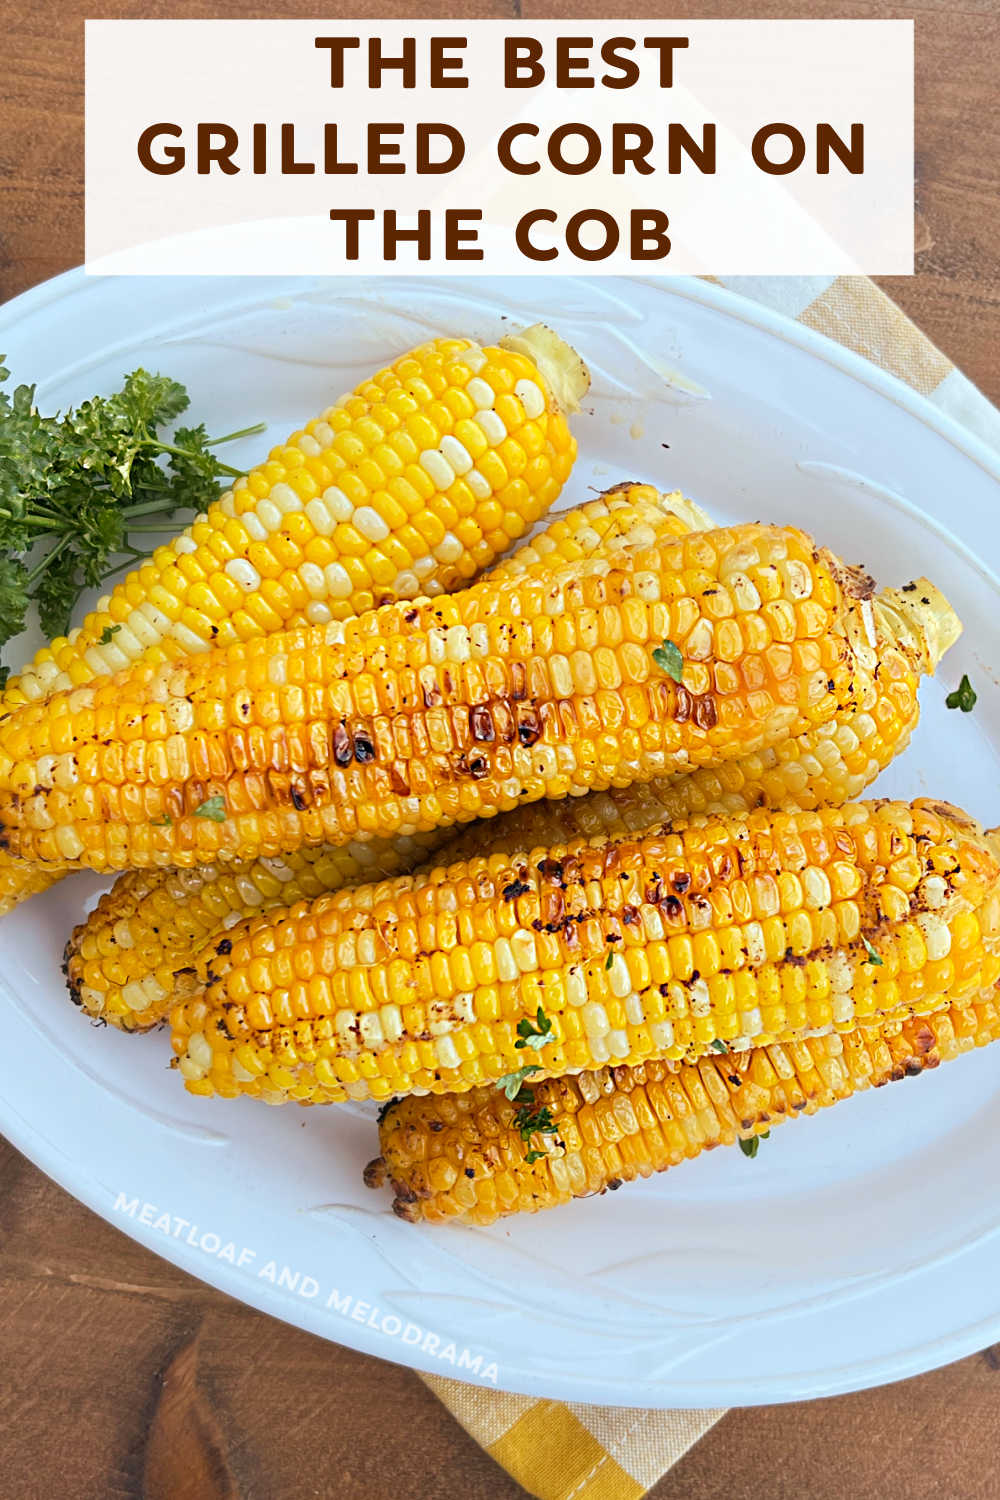 Grilled Corn on the Cob in Foil is the best way to grill fresh corn and our favorite way to make it! Grilled corn in foil packets is an easy recipe for a delicious  summer side dish that everyone loves and goes well with anything else you cook on the grill. You'll love the easy clean-up, too! via @meamel